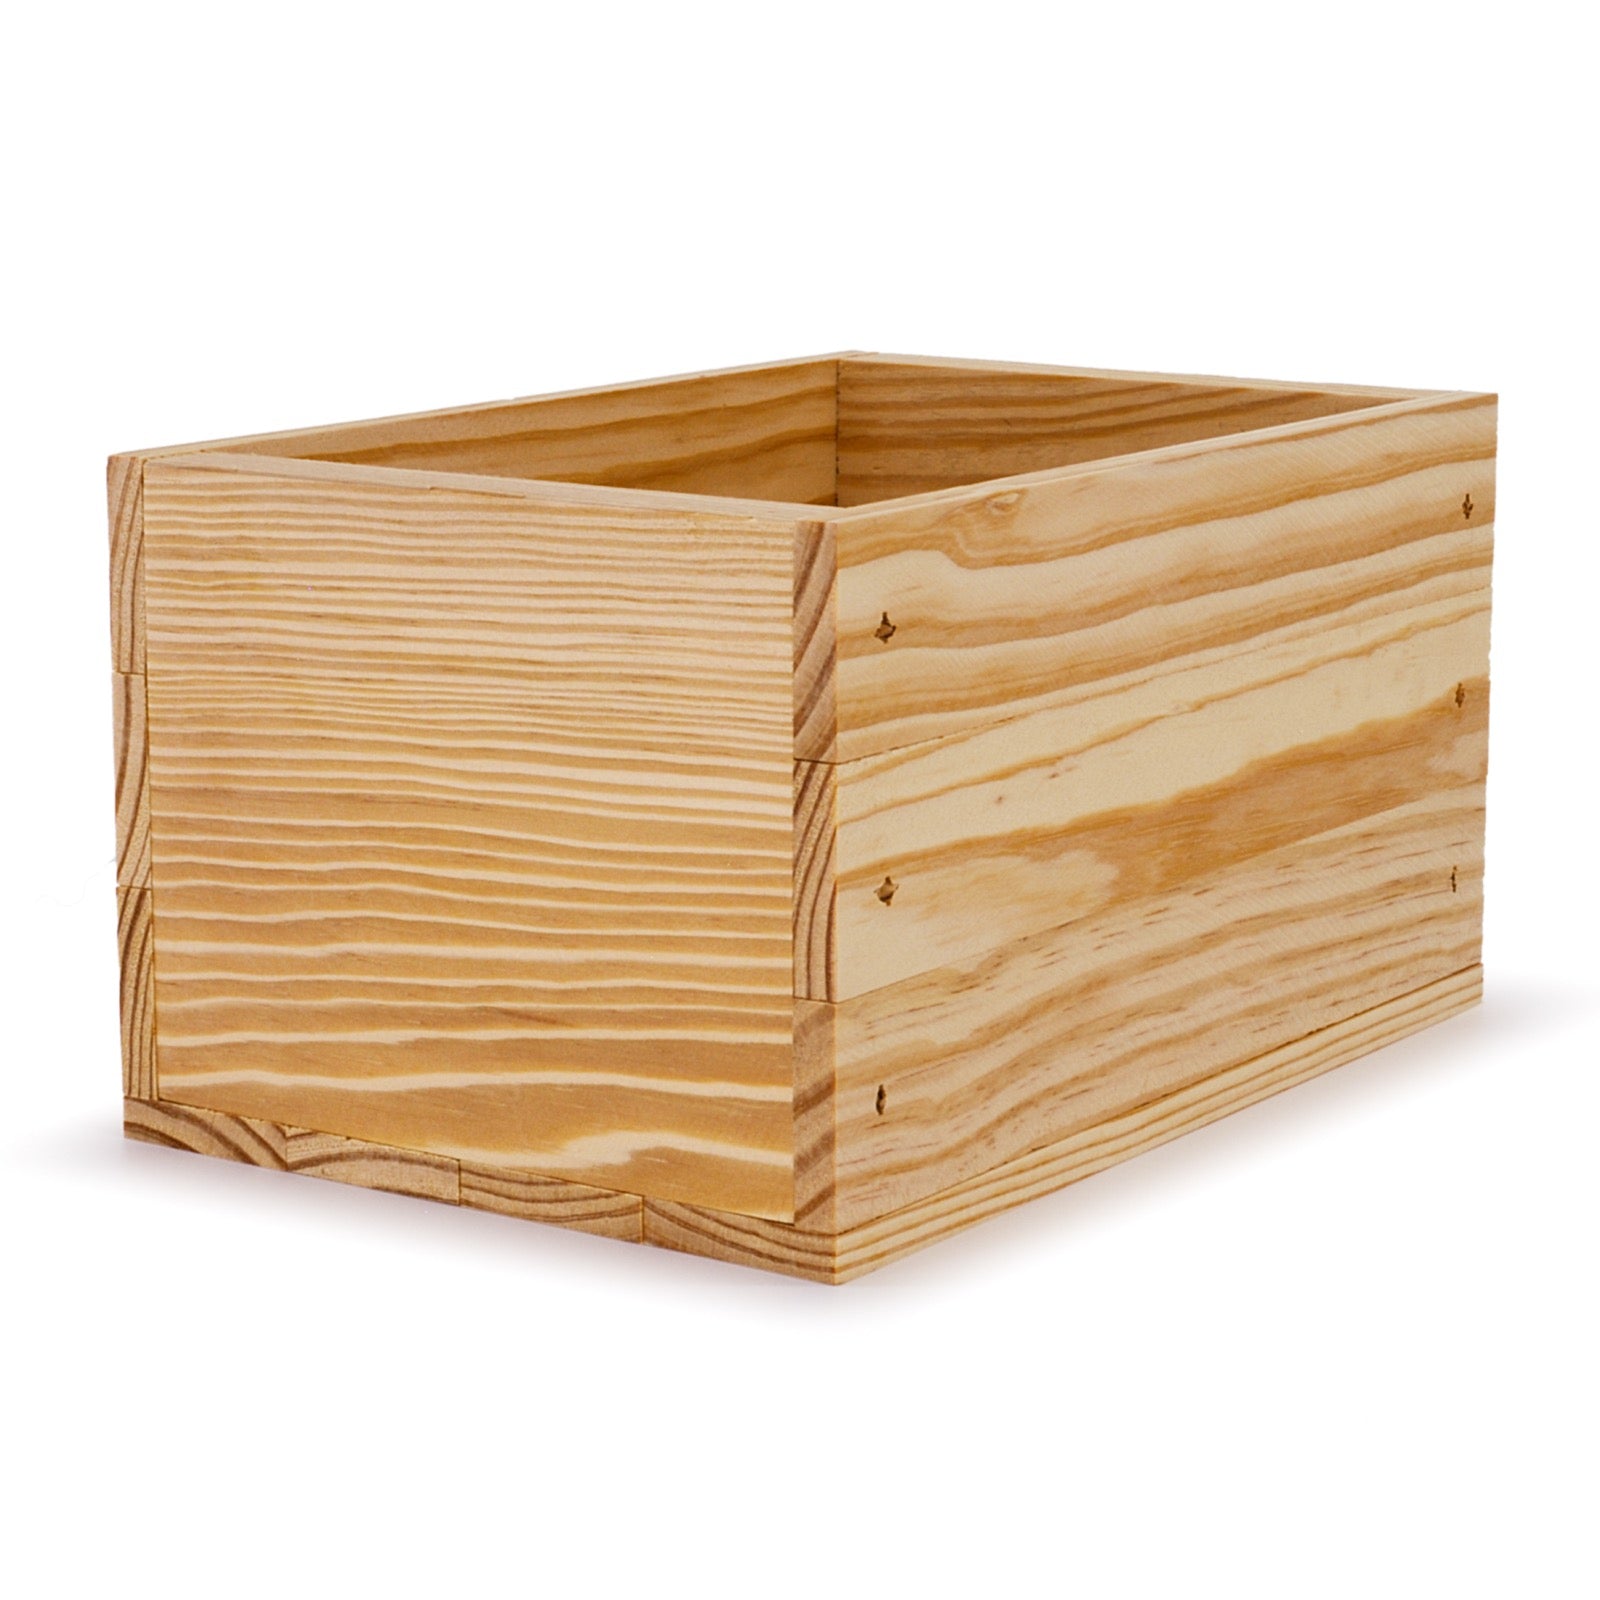 Small Wooden Crate Boxes 9 x 6 1/4 x 5 1/4 – Carpenter Core